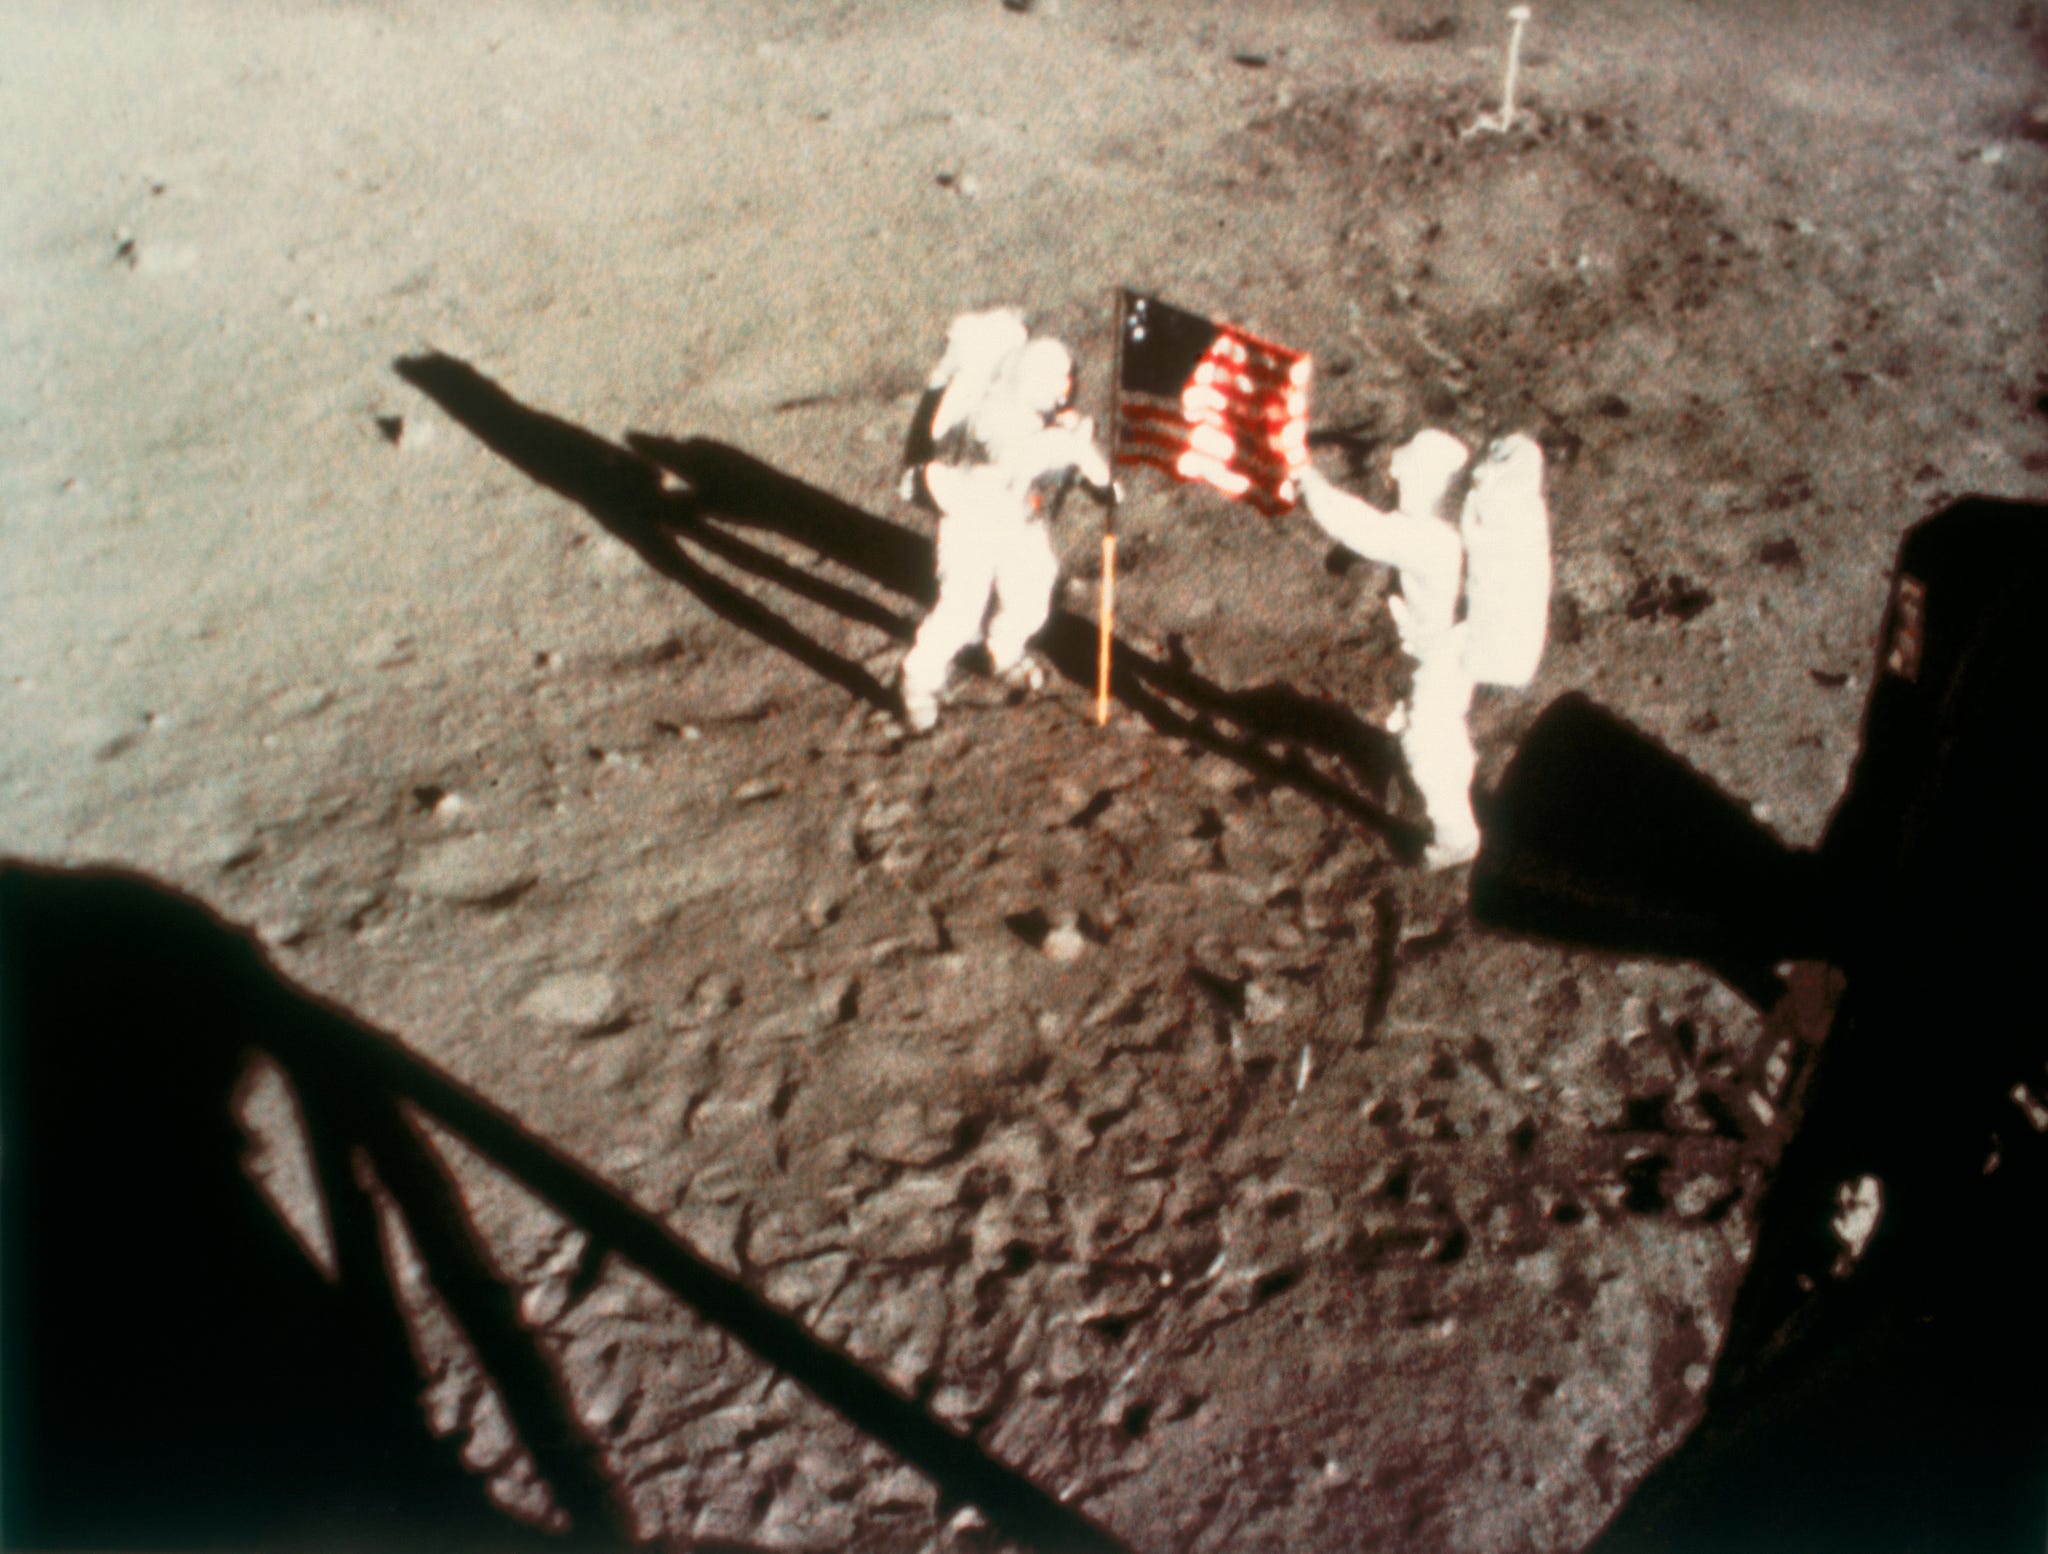 Astronauts Armstrong and Aldrin unfurling the US flag on the Moon, 1969.